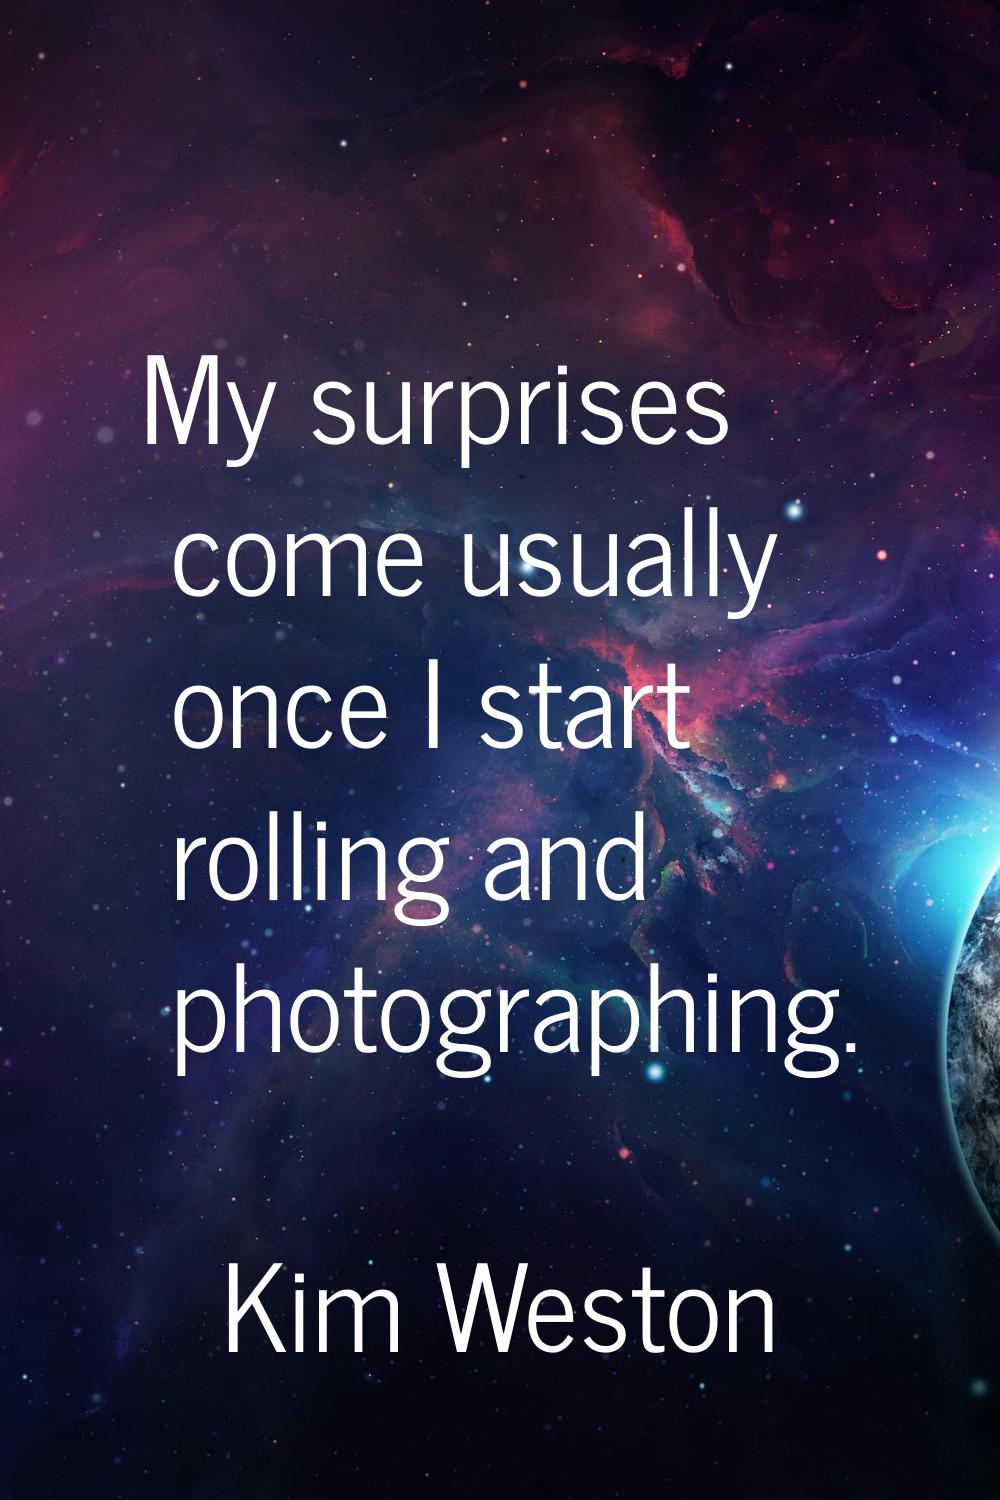 My surprises come usually once I start rolling and photographing.